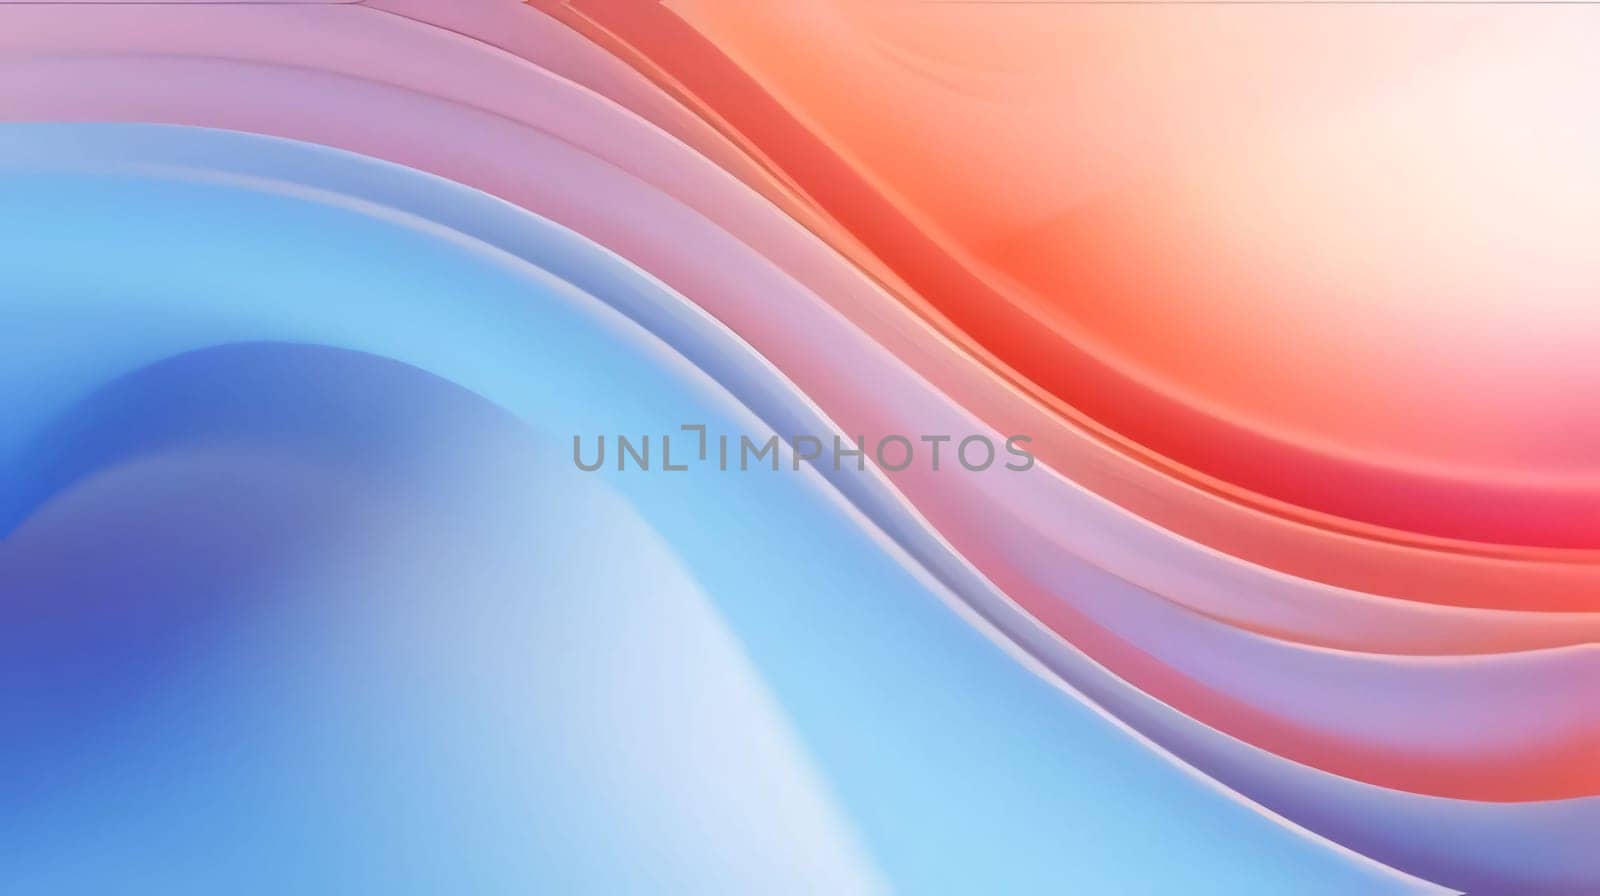 Abstract background design: abstract background with smooth lines in blue, pink and orange colors